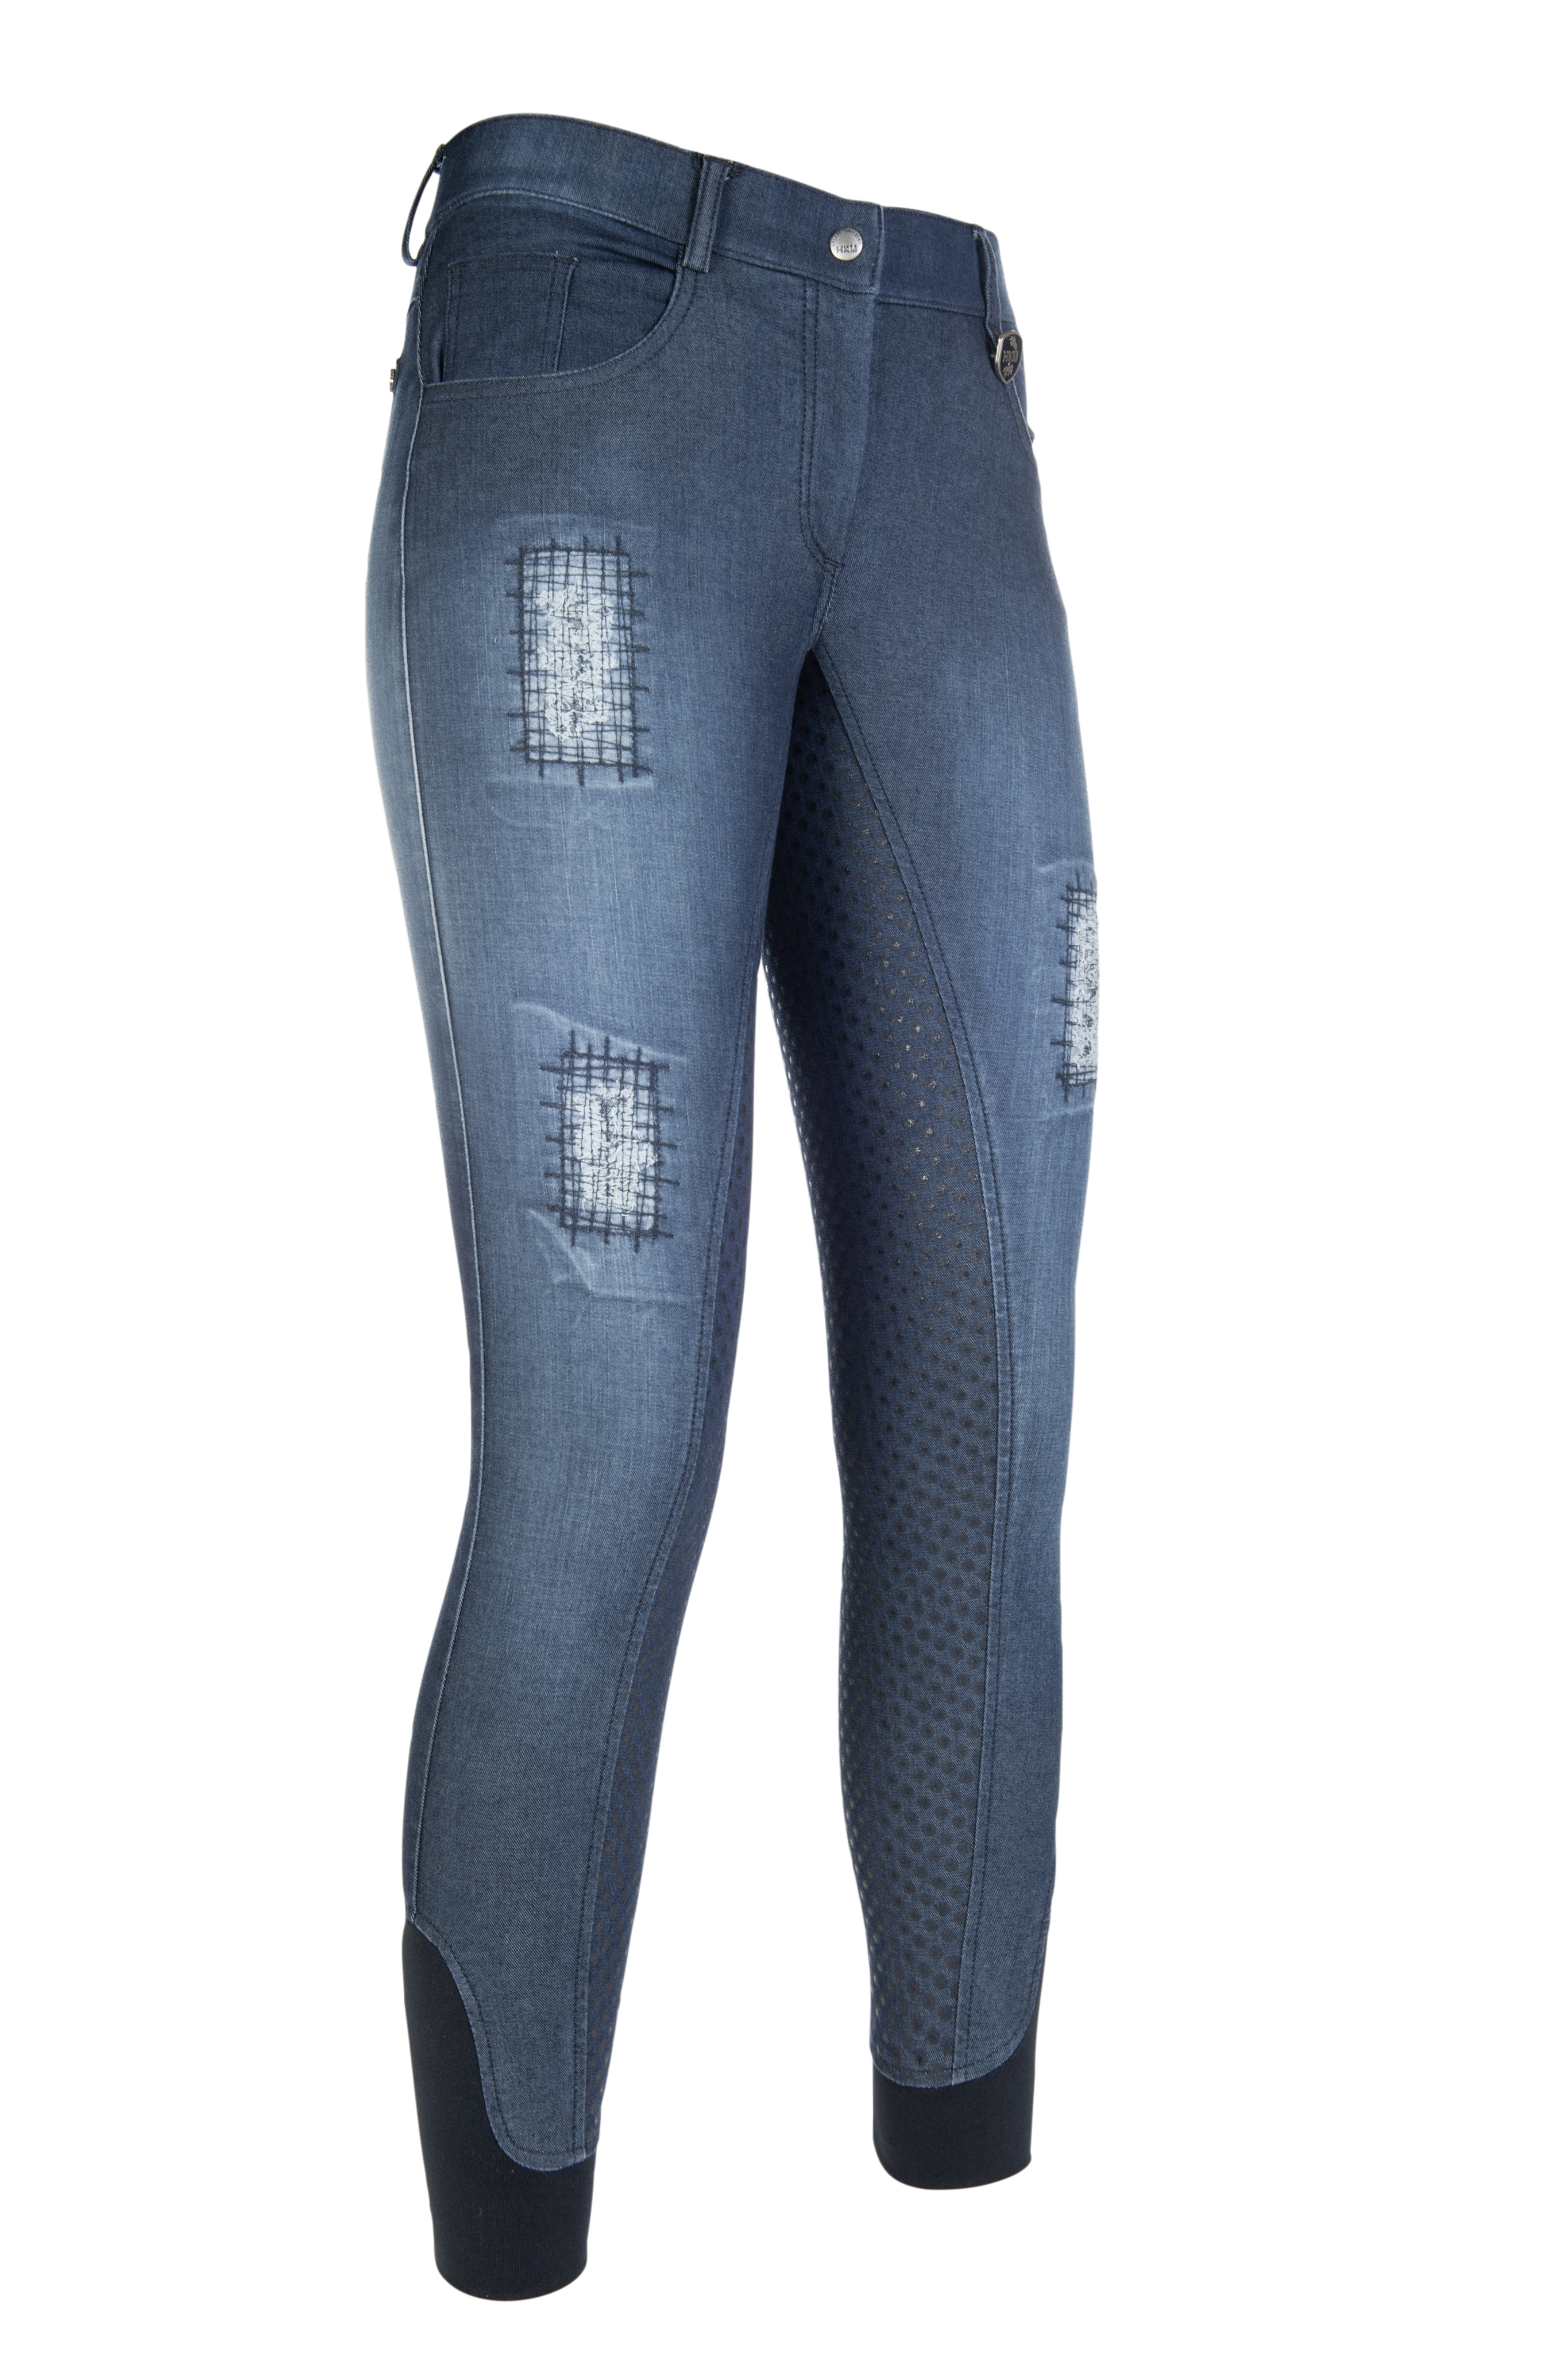 HKM Ladies SUMMER COOL Sports Denim Breathable Breeches SILICONE FULL GRIP Seat 